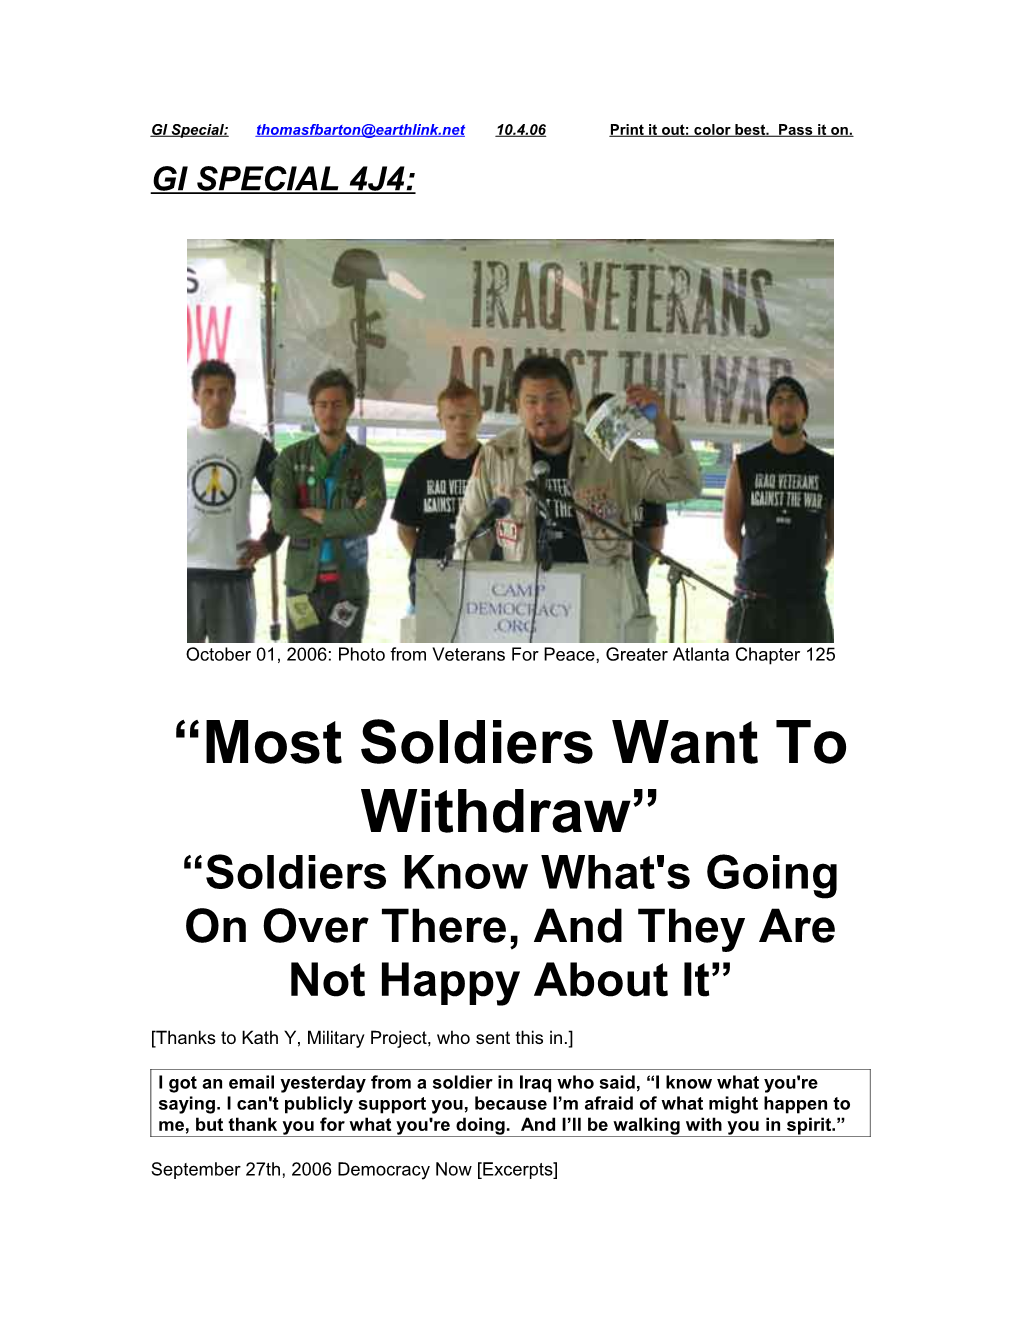 Most Soldiers Want to Withdraw